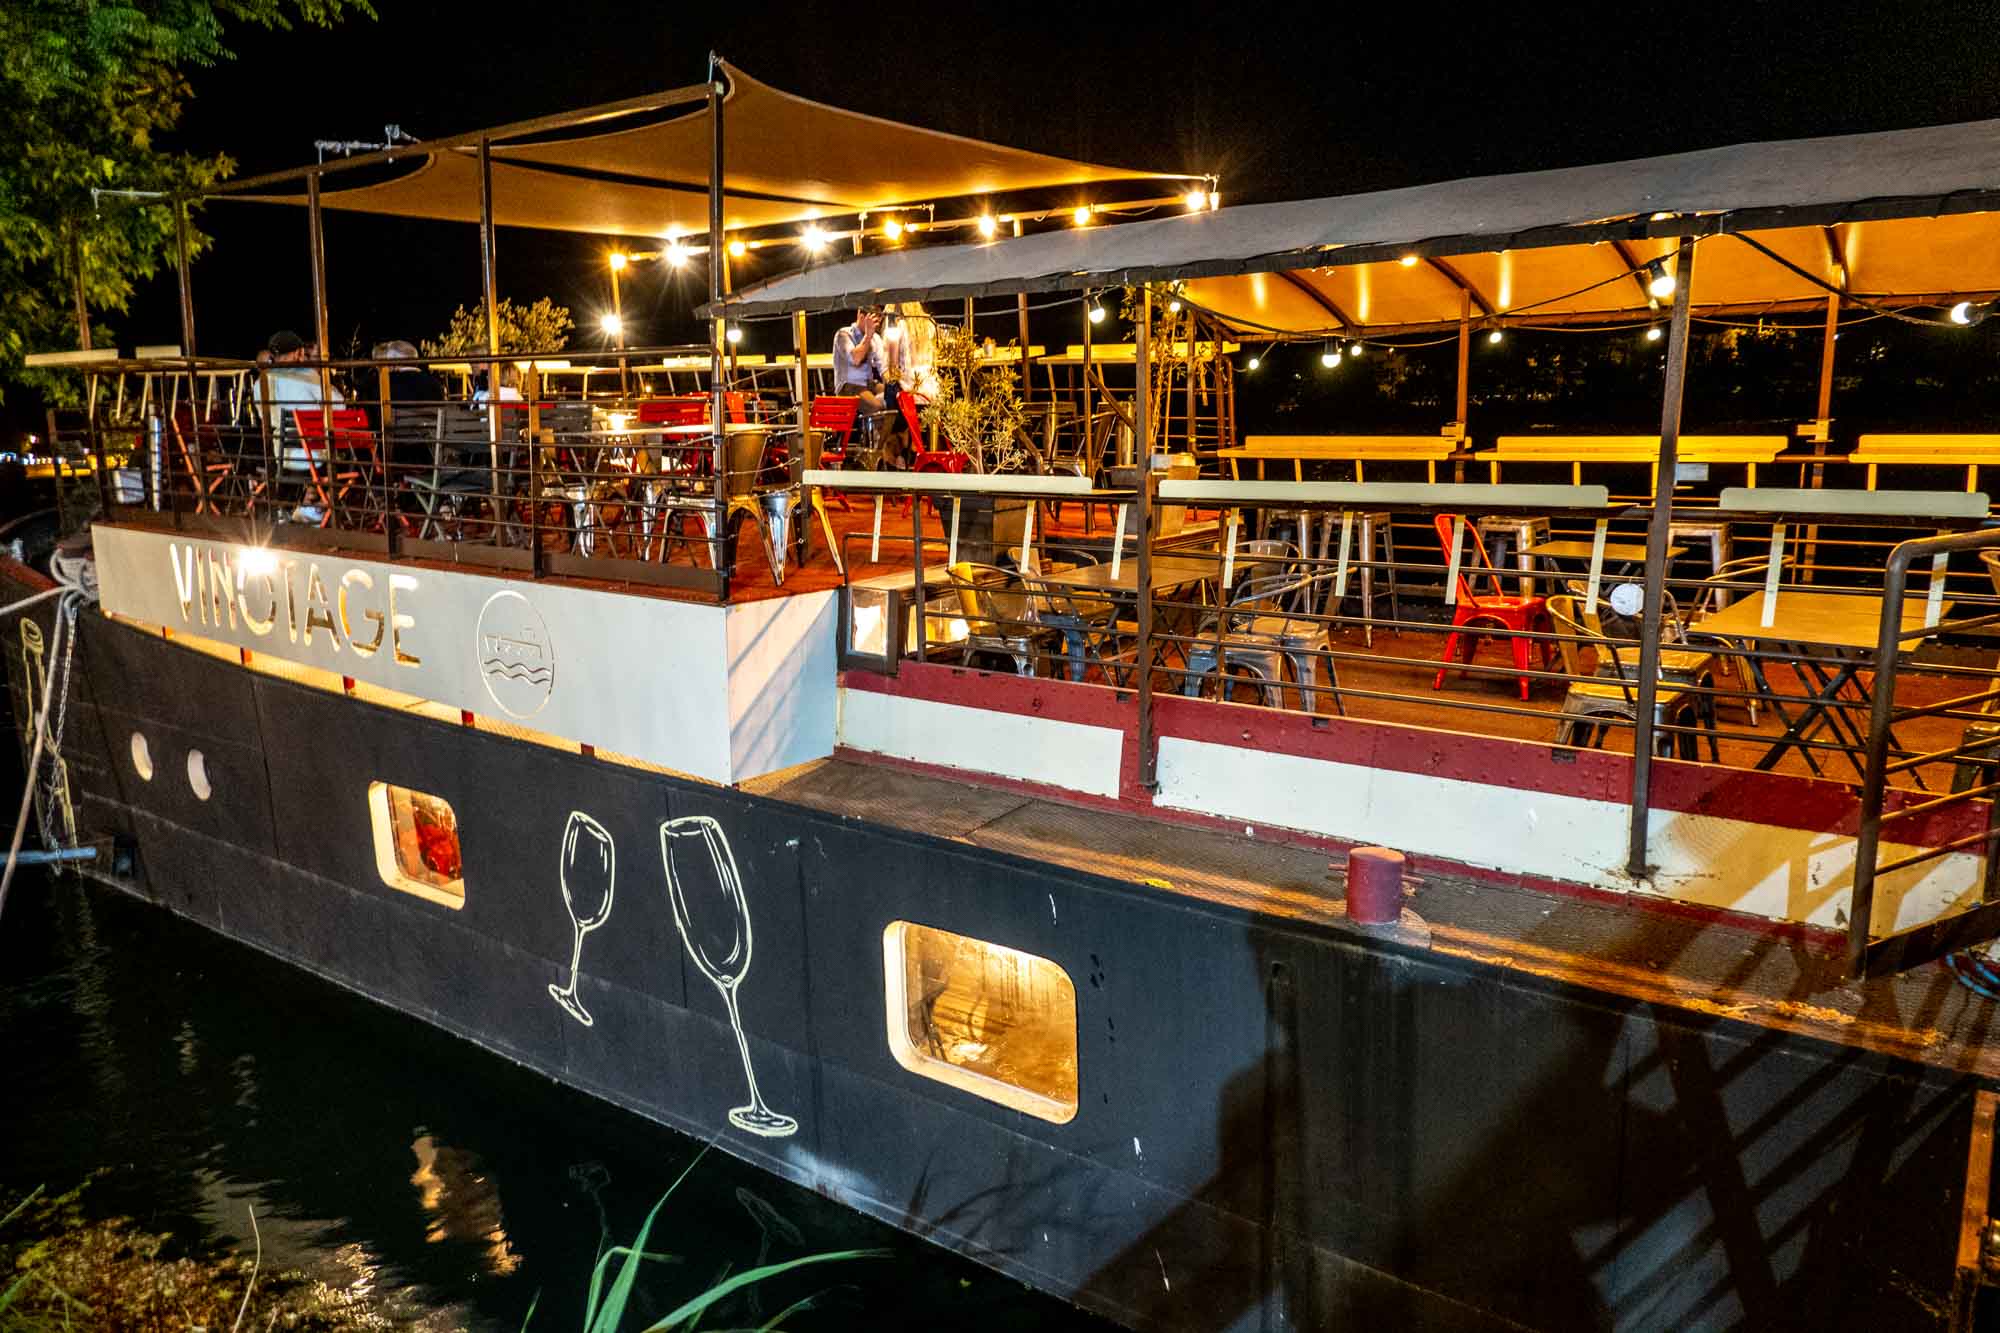 Wine bar on a black barge lit up at night with a sign for "Vinotage."